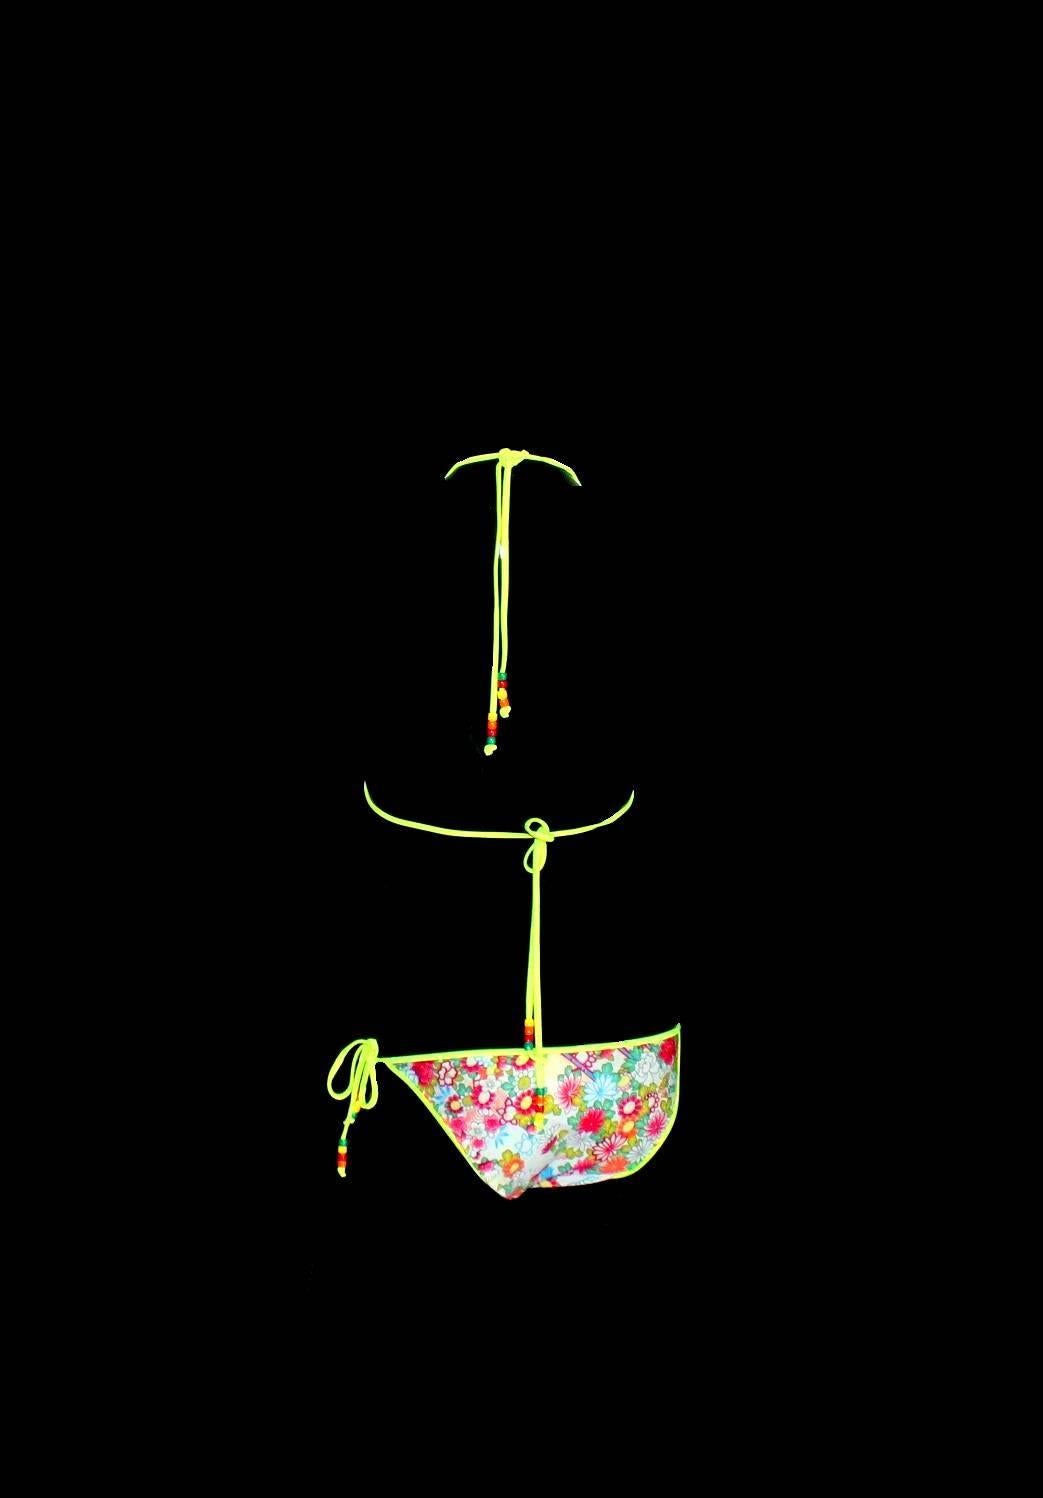 Stunning Christian Dior bikini
Designed by John Galliano for Christian Dior
Multicolor print
Lined
Pearls trimming
Made in France

